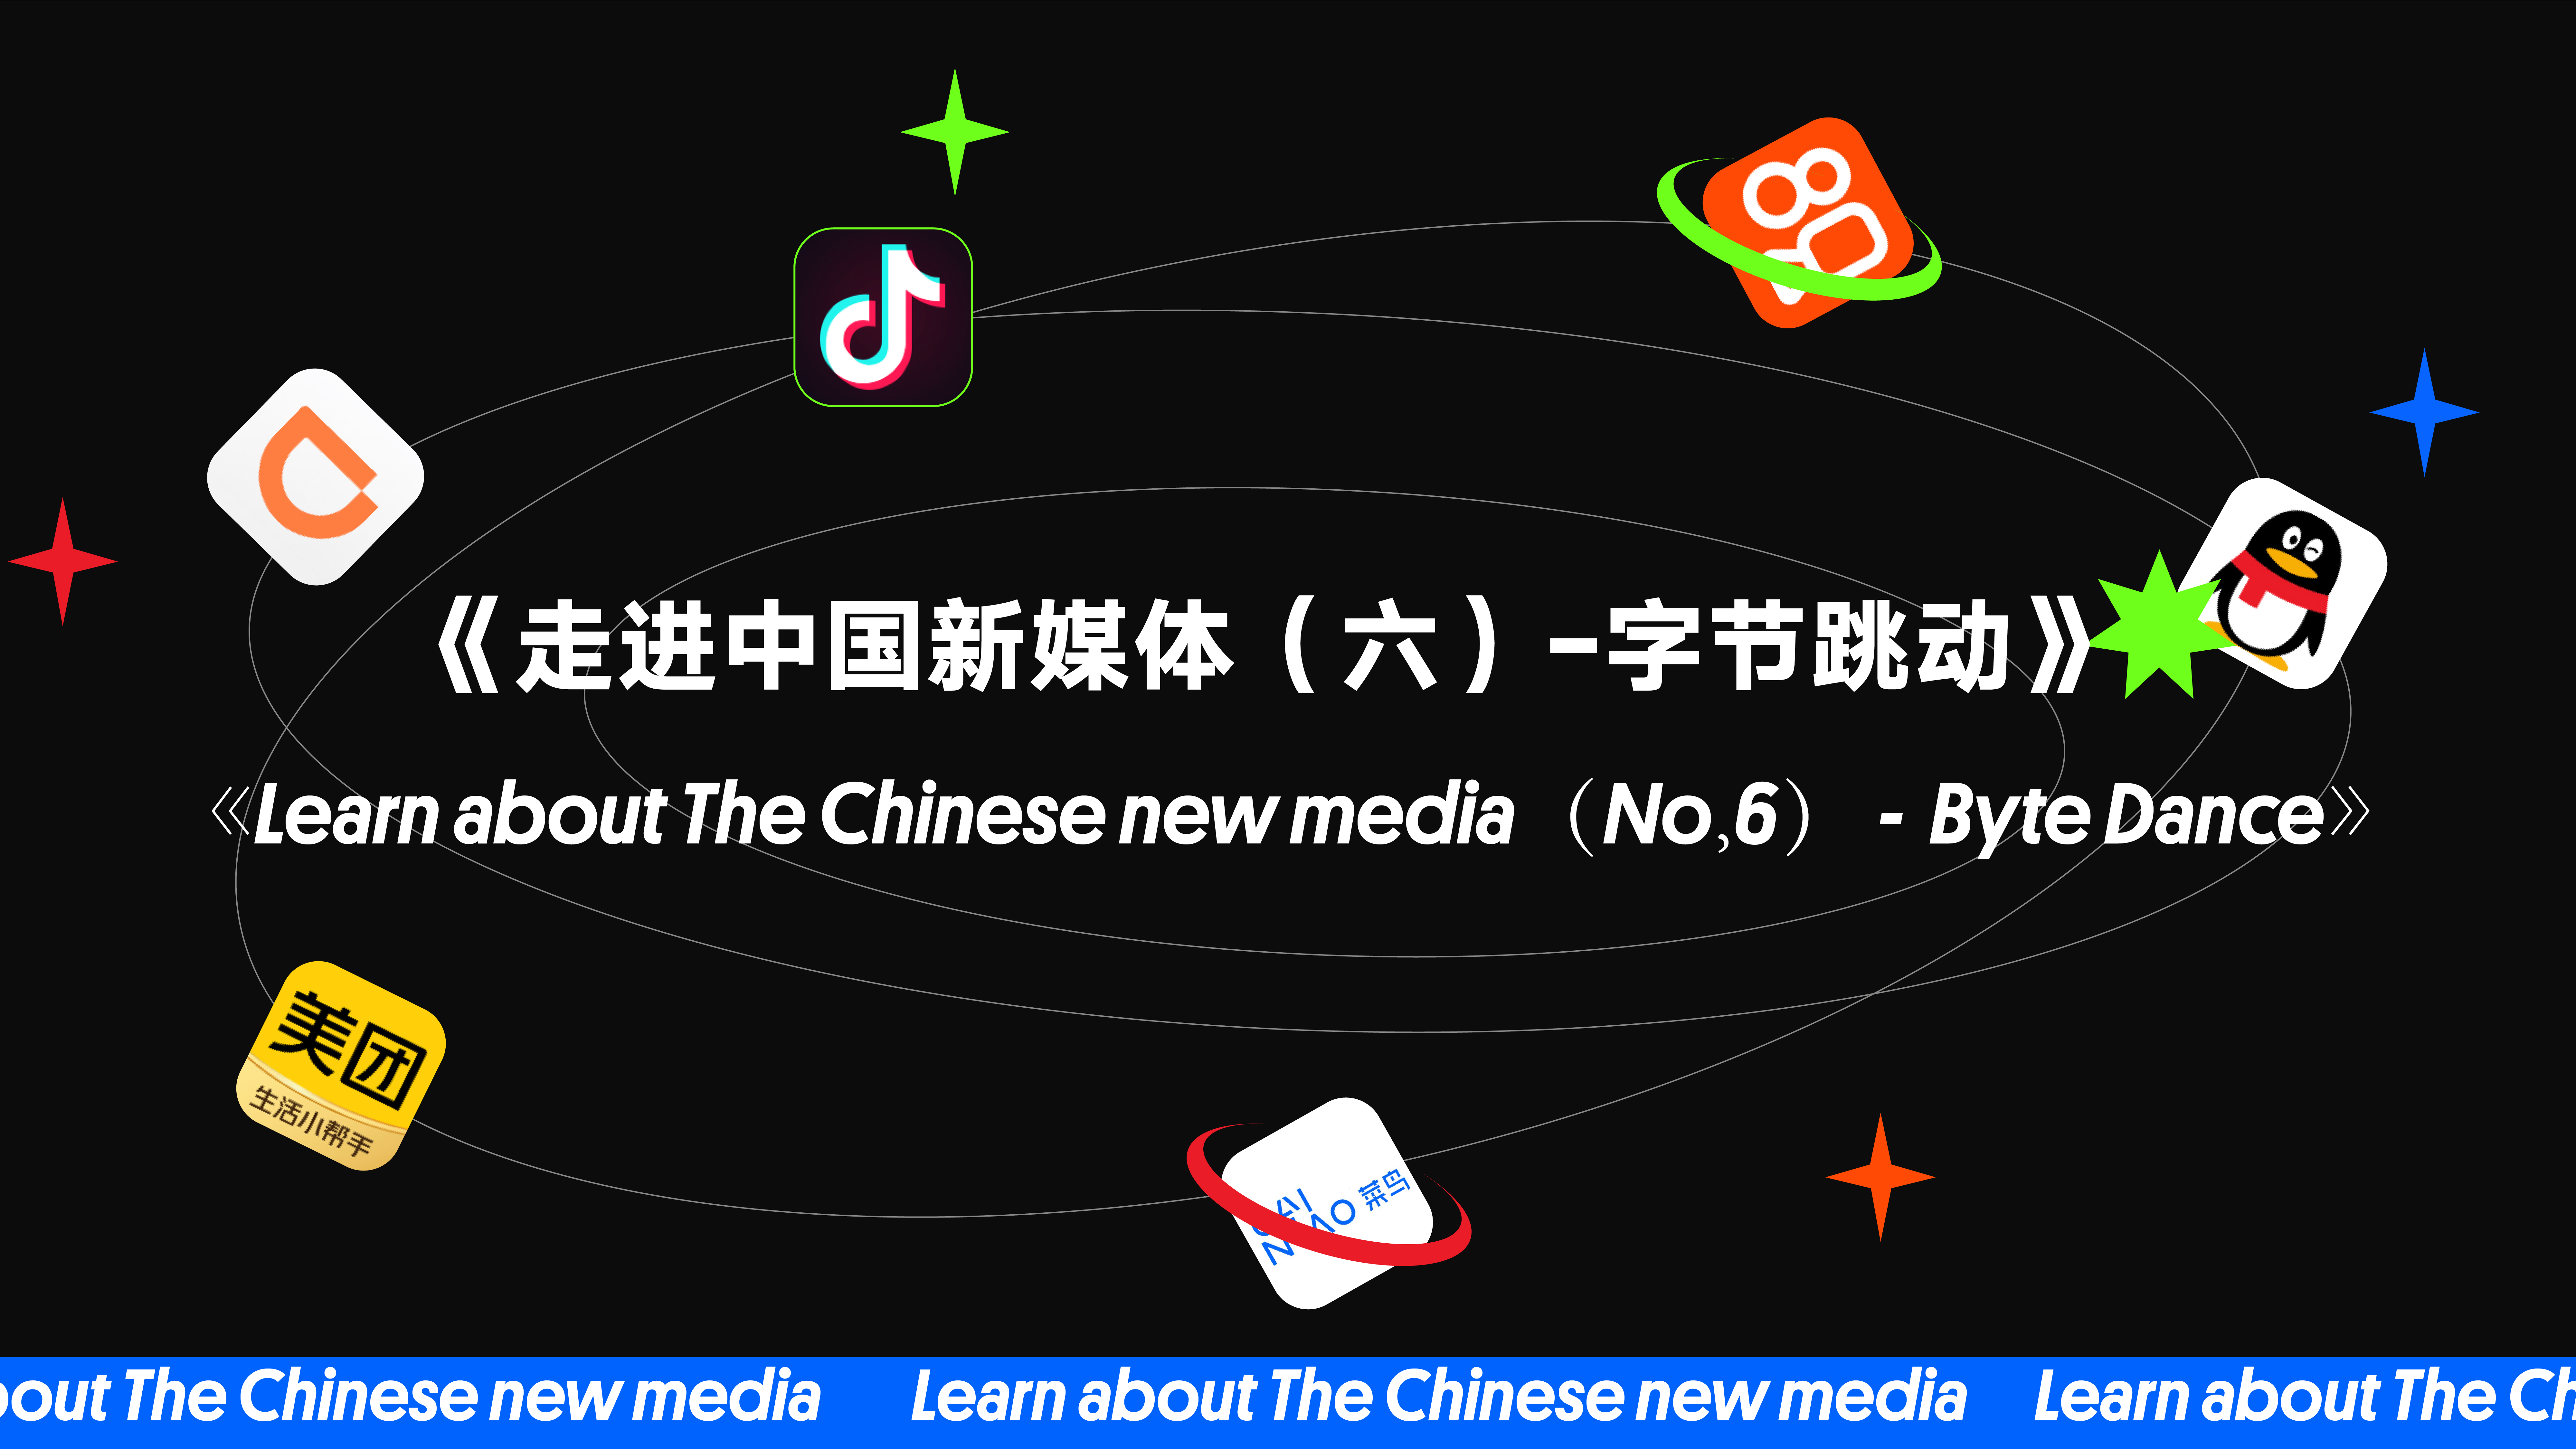 《Learn about The Chinese new media（No.6）—Byte Dance》